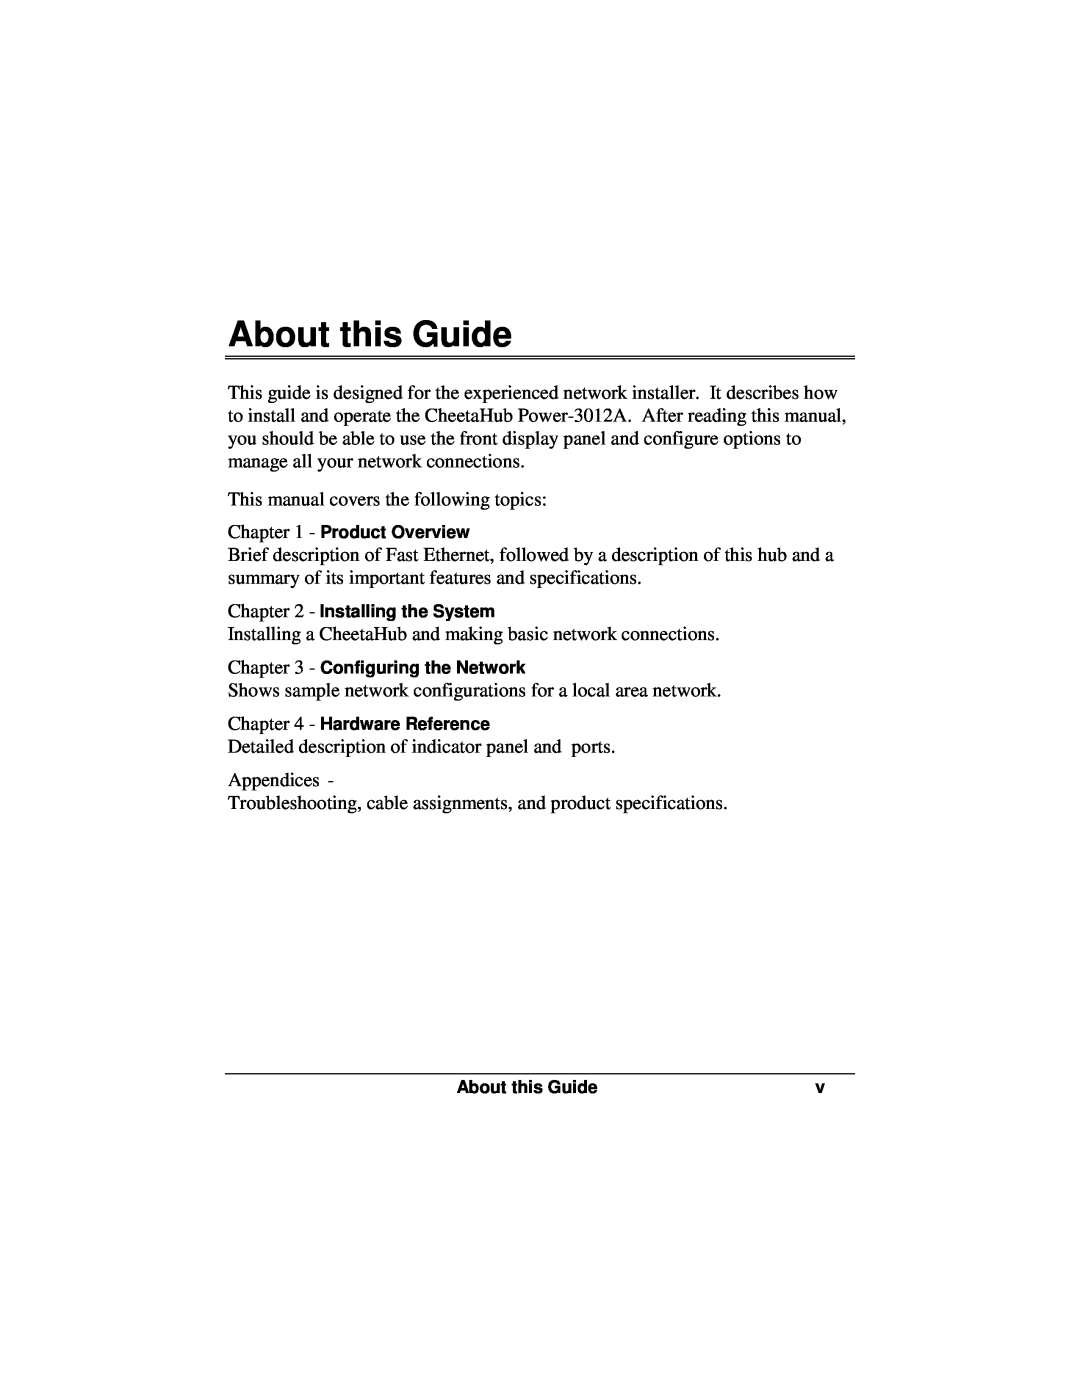 Accton Technology POWER-3012A manual About this Guide 